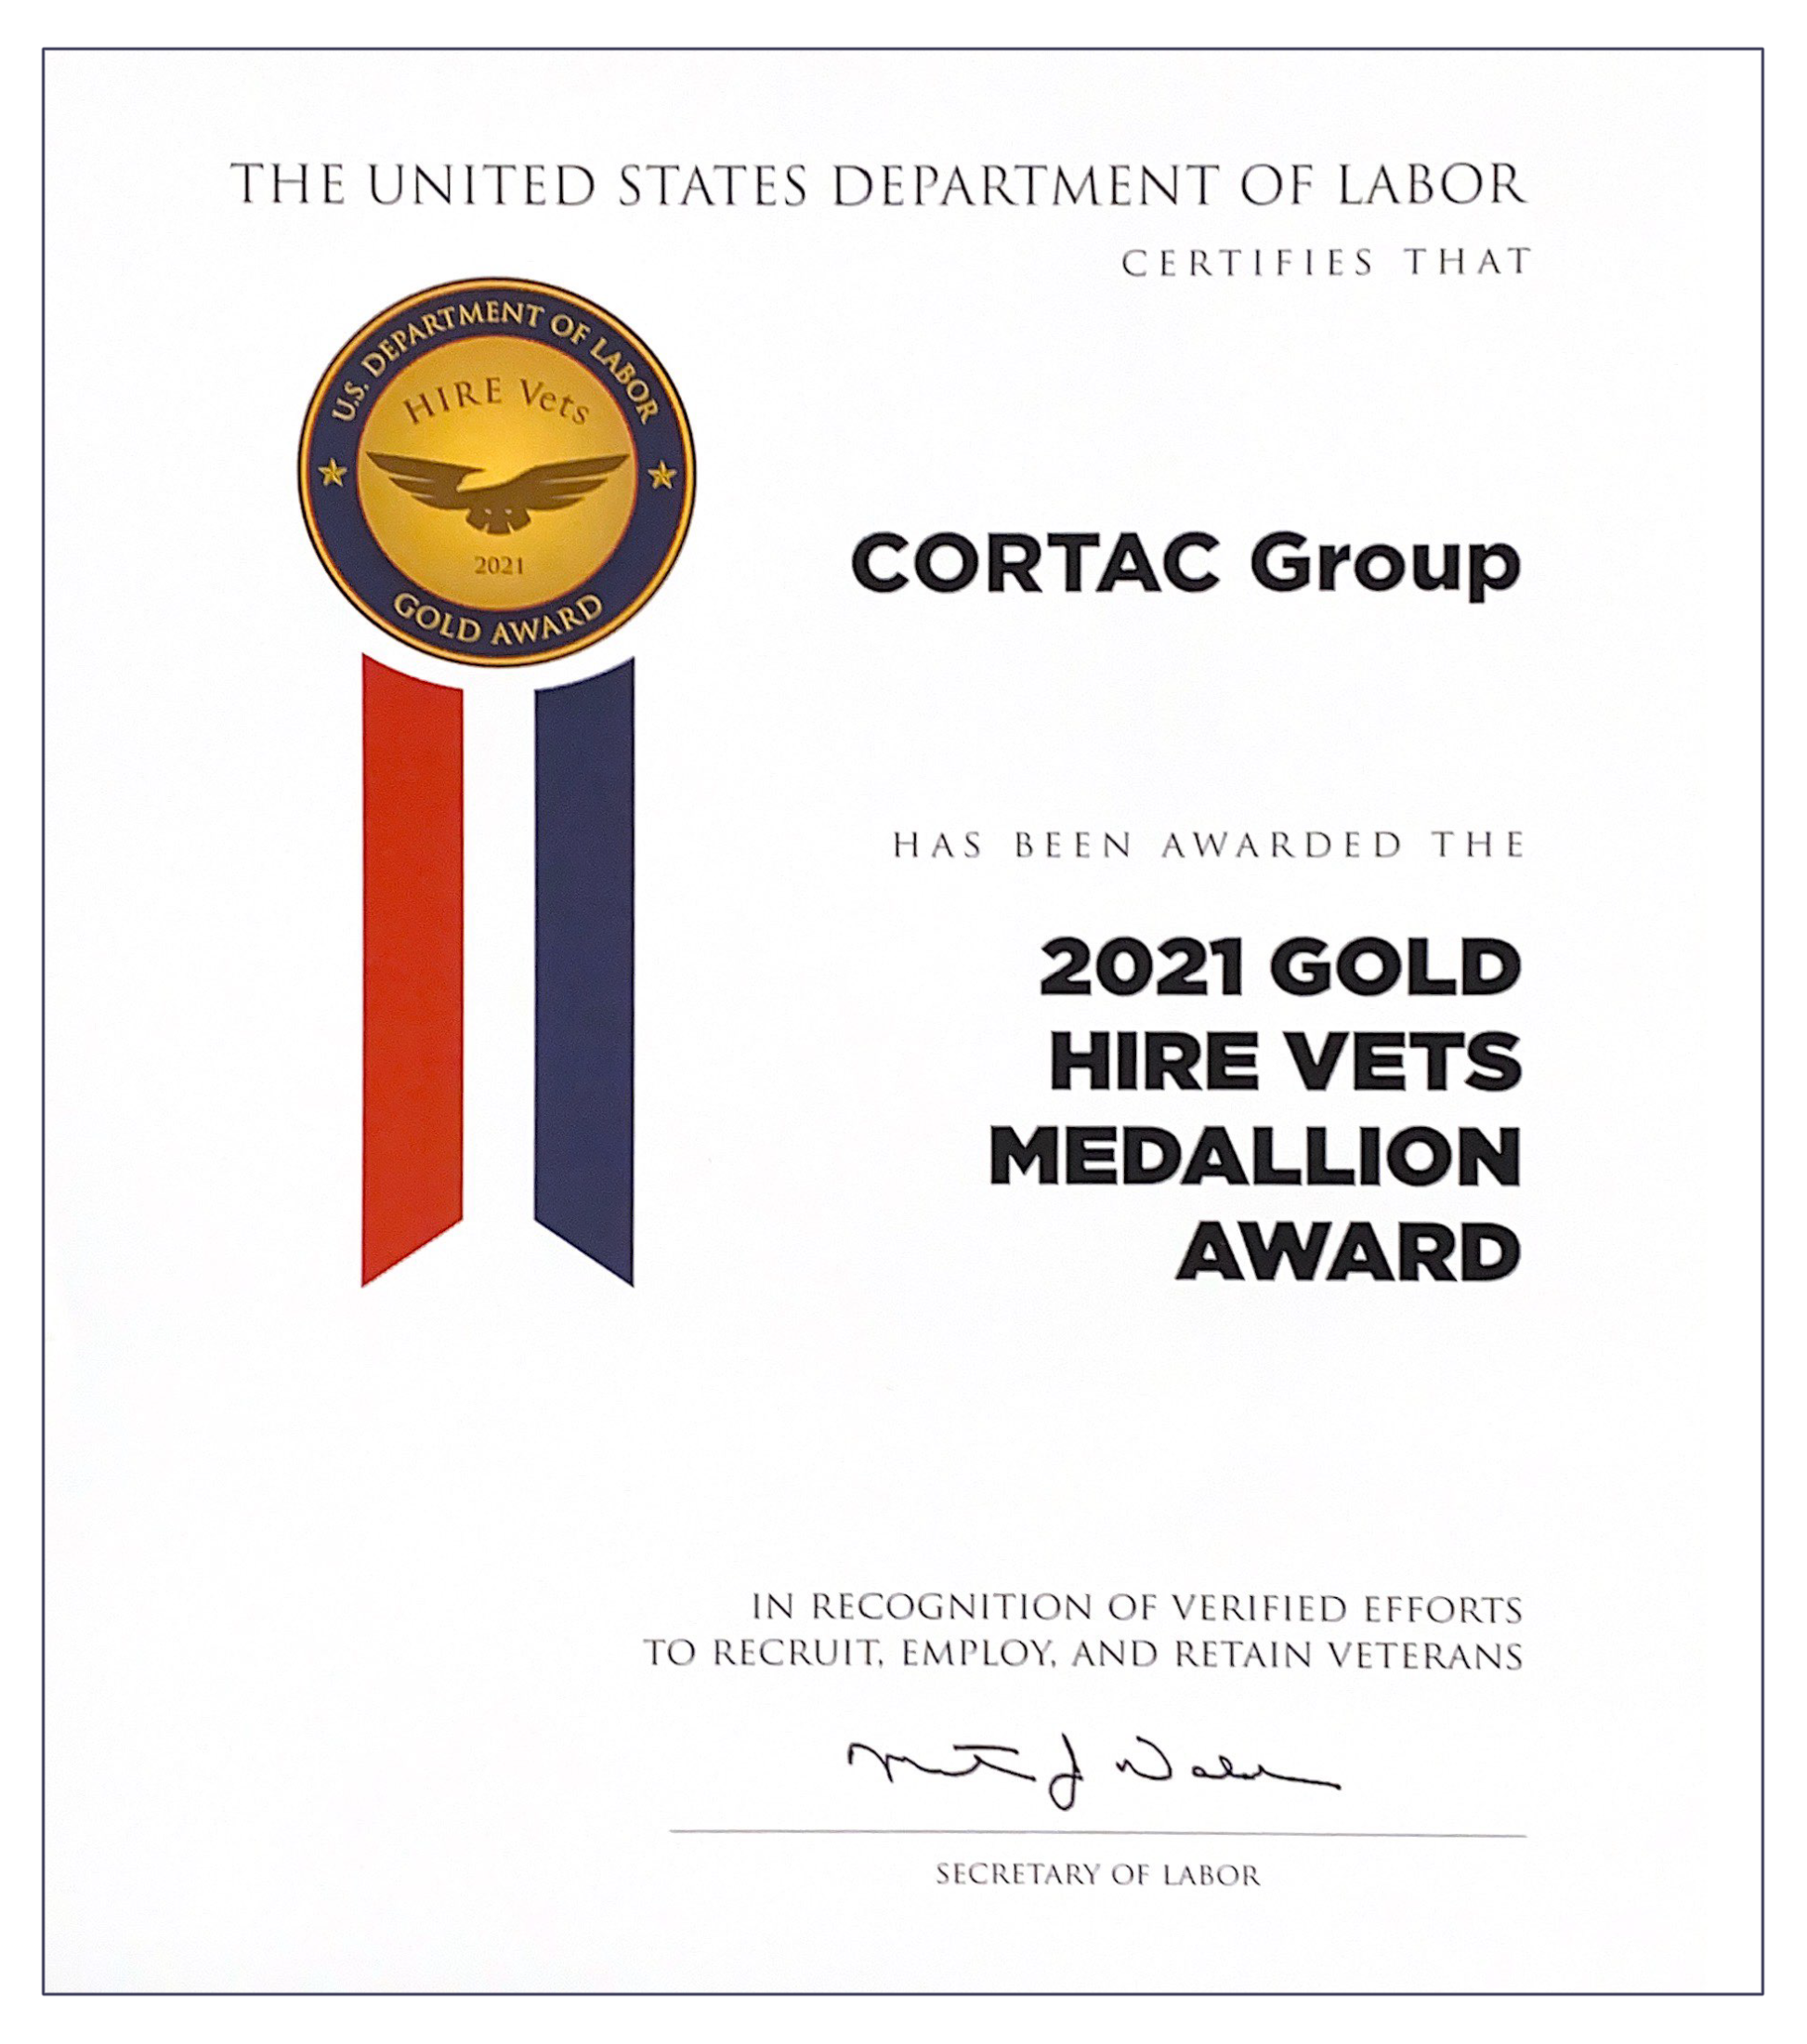 CORTAC Group presented with 2021 Gold Hire Vets Medallion Award by U.S. Department of Labor